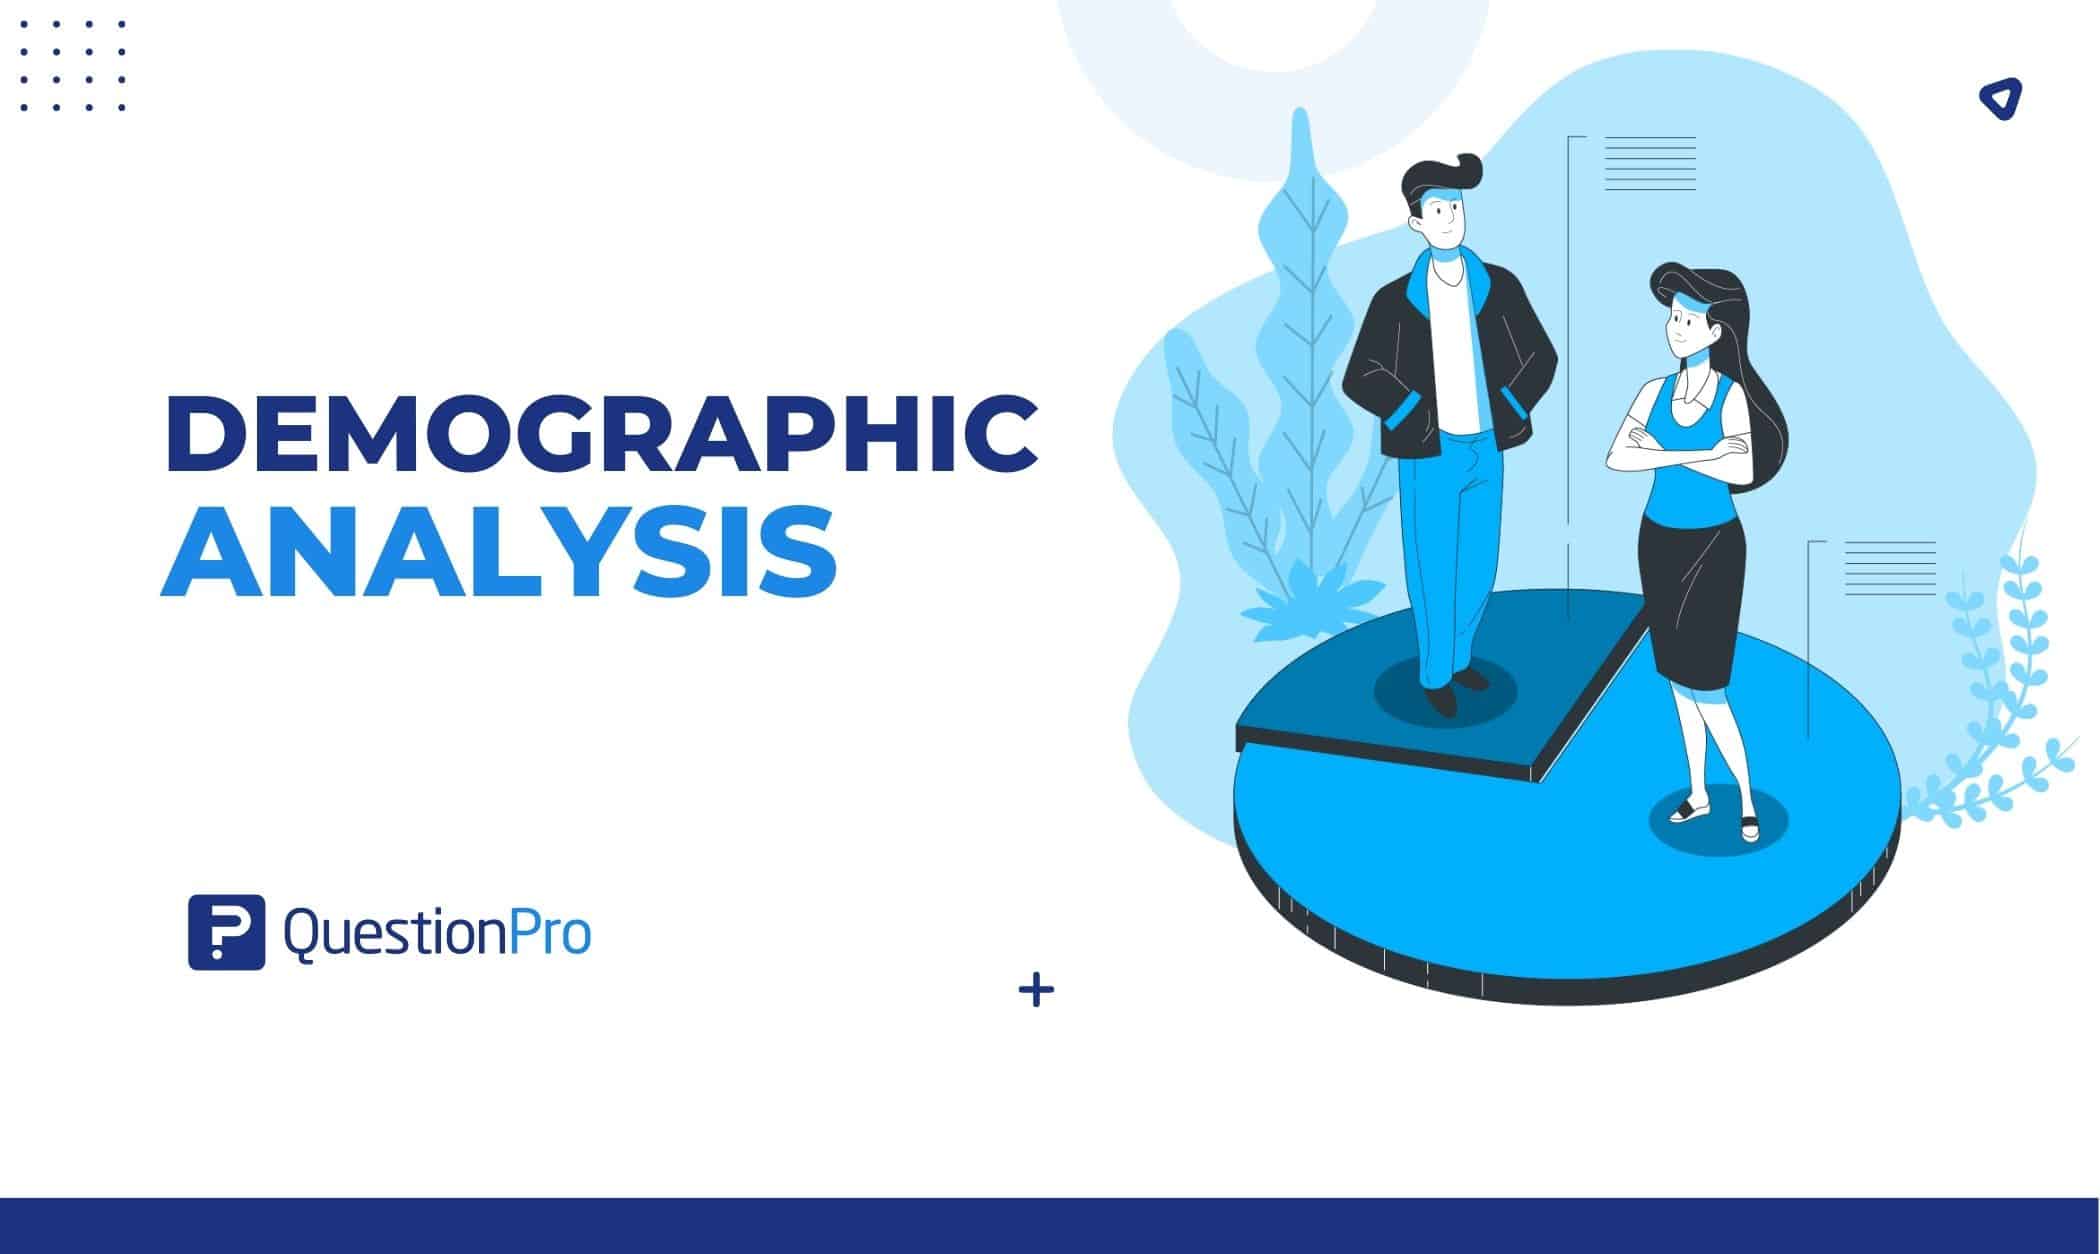 Demographic analysis gathers and analyzes demographic data. Business marketers utilize it to find the best ways to reach + analyze customers.